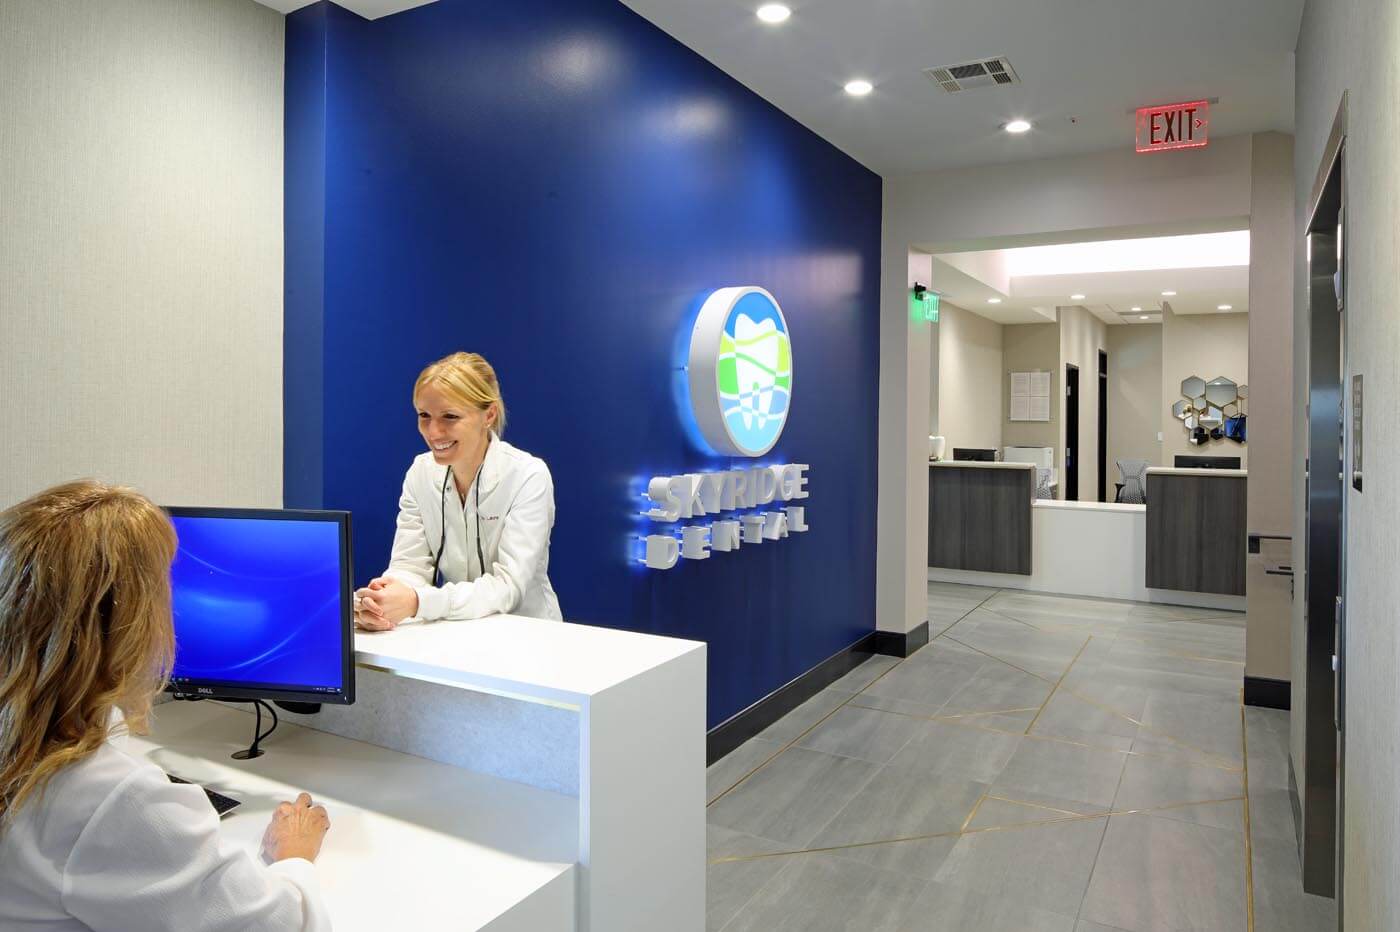 Dr. Cook talks with a staff member in a clean, modern office. An accent wall is painted blue and features a softly glowing SkyRidge Dental sign.